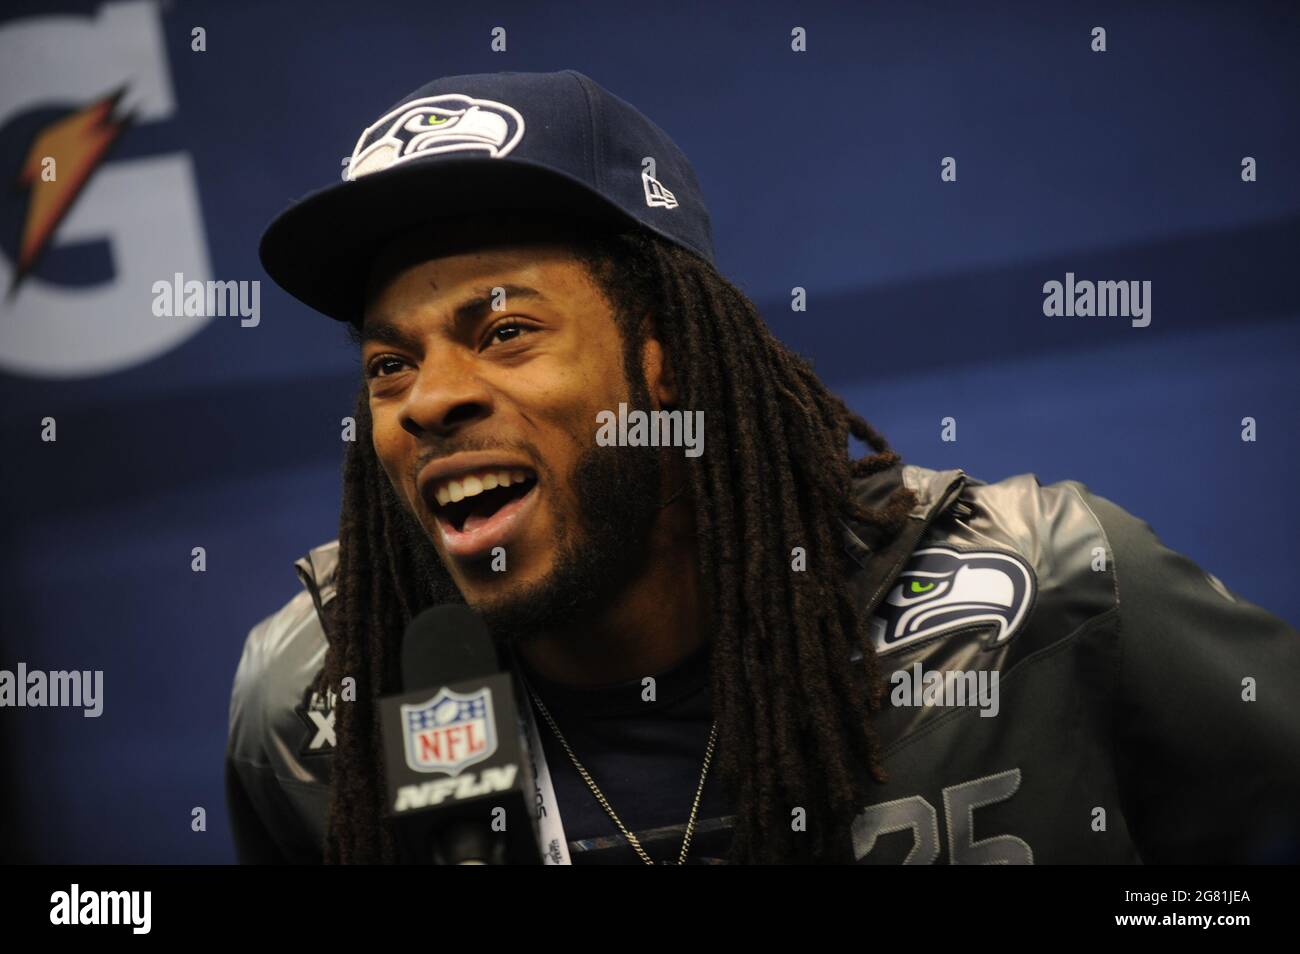 Newark, United States Of America. 28th Jan, 2014. NEWARK, NJ - JANUARY 28: Richard Sherman speaks to the media during Super Bowl XLVIII Media Day at the Prudential Center on January 28, 2014 in Newark, New Jersey. Super Bowl XLVIII will be played between the Seattle Seahawks and the Denver Broncos on February 2. in Newark New Jersey People: Richard Sherman Credit: Storms Media Group/Alamy Live News Stock Photo